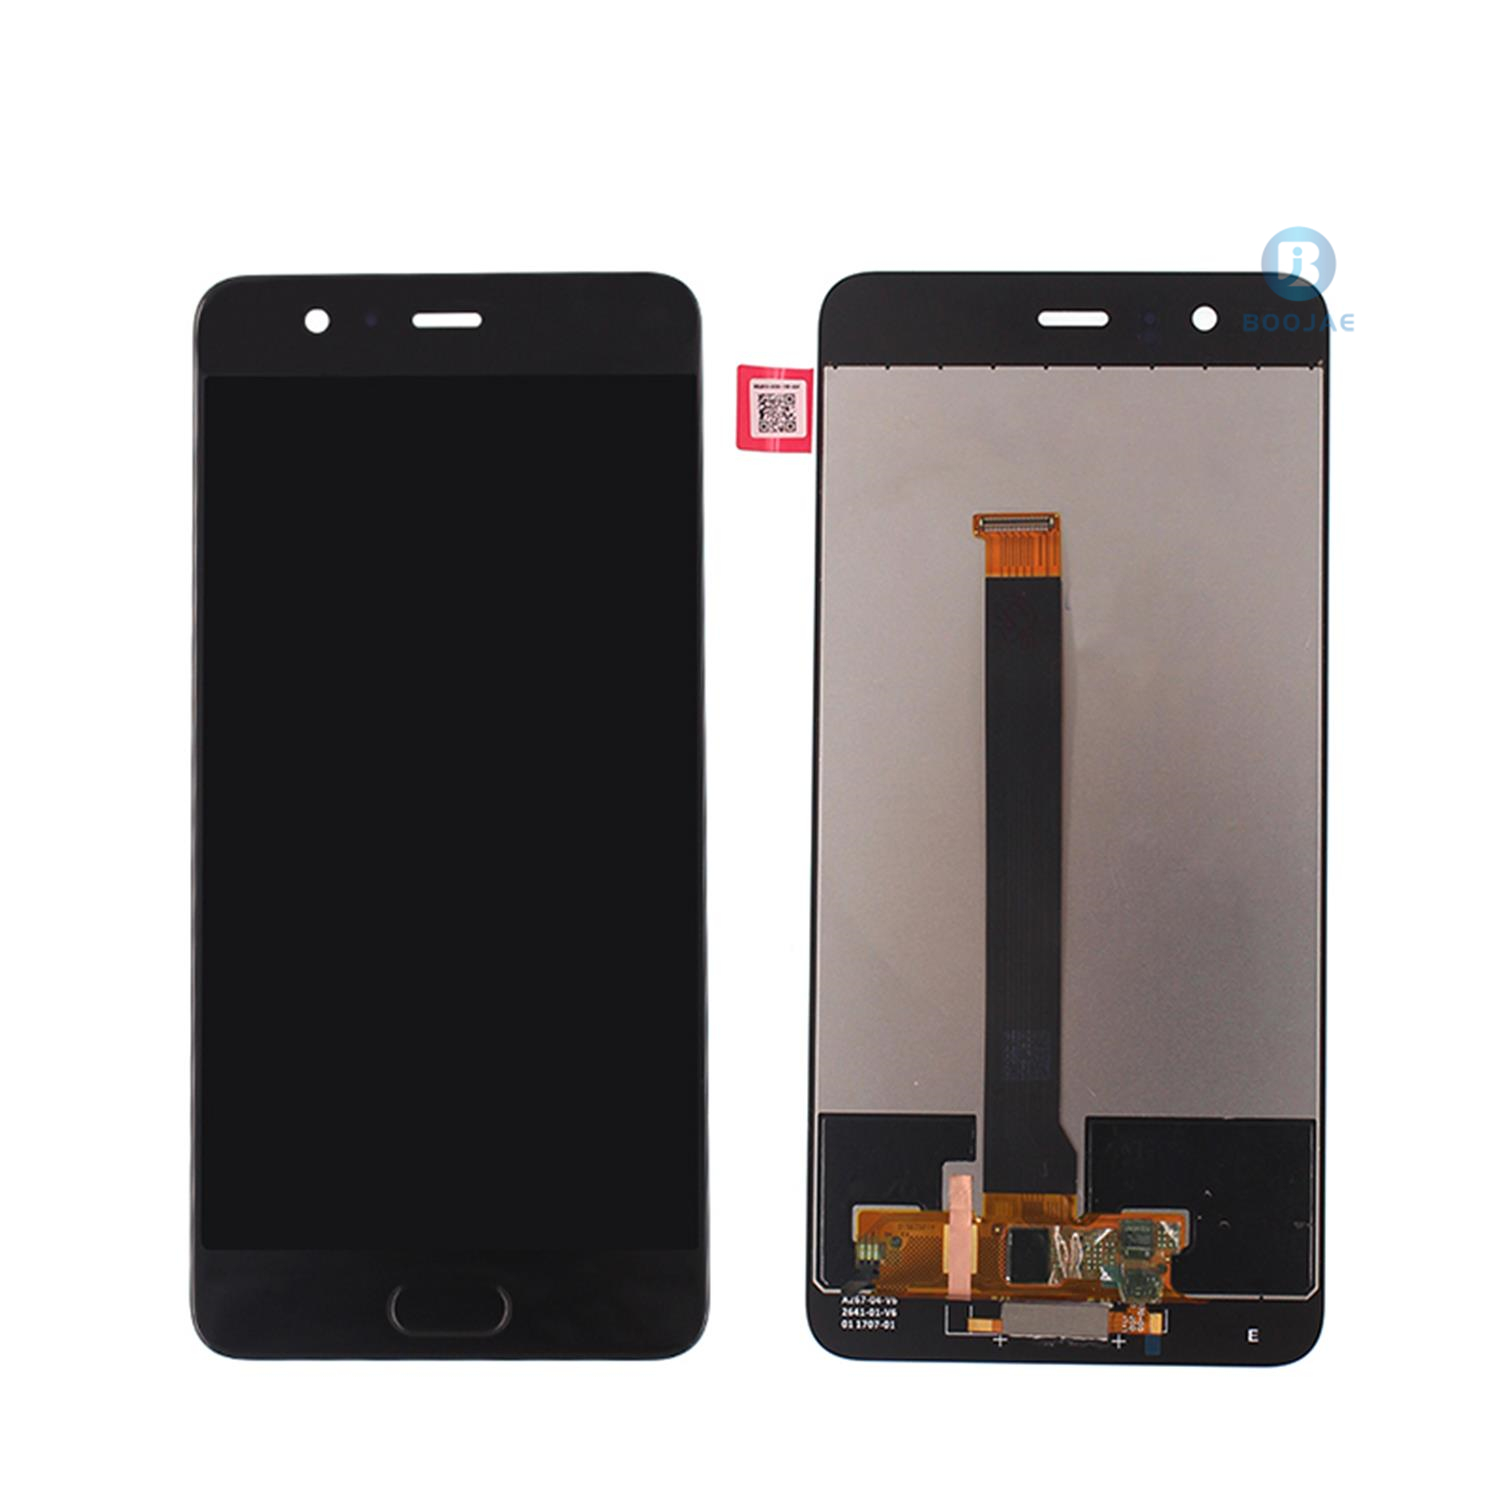 Huawei P10 Plus LCD Screen Display and Touch Panel Digitizer Assembly Replacement